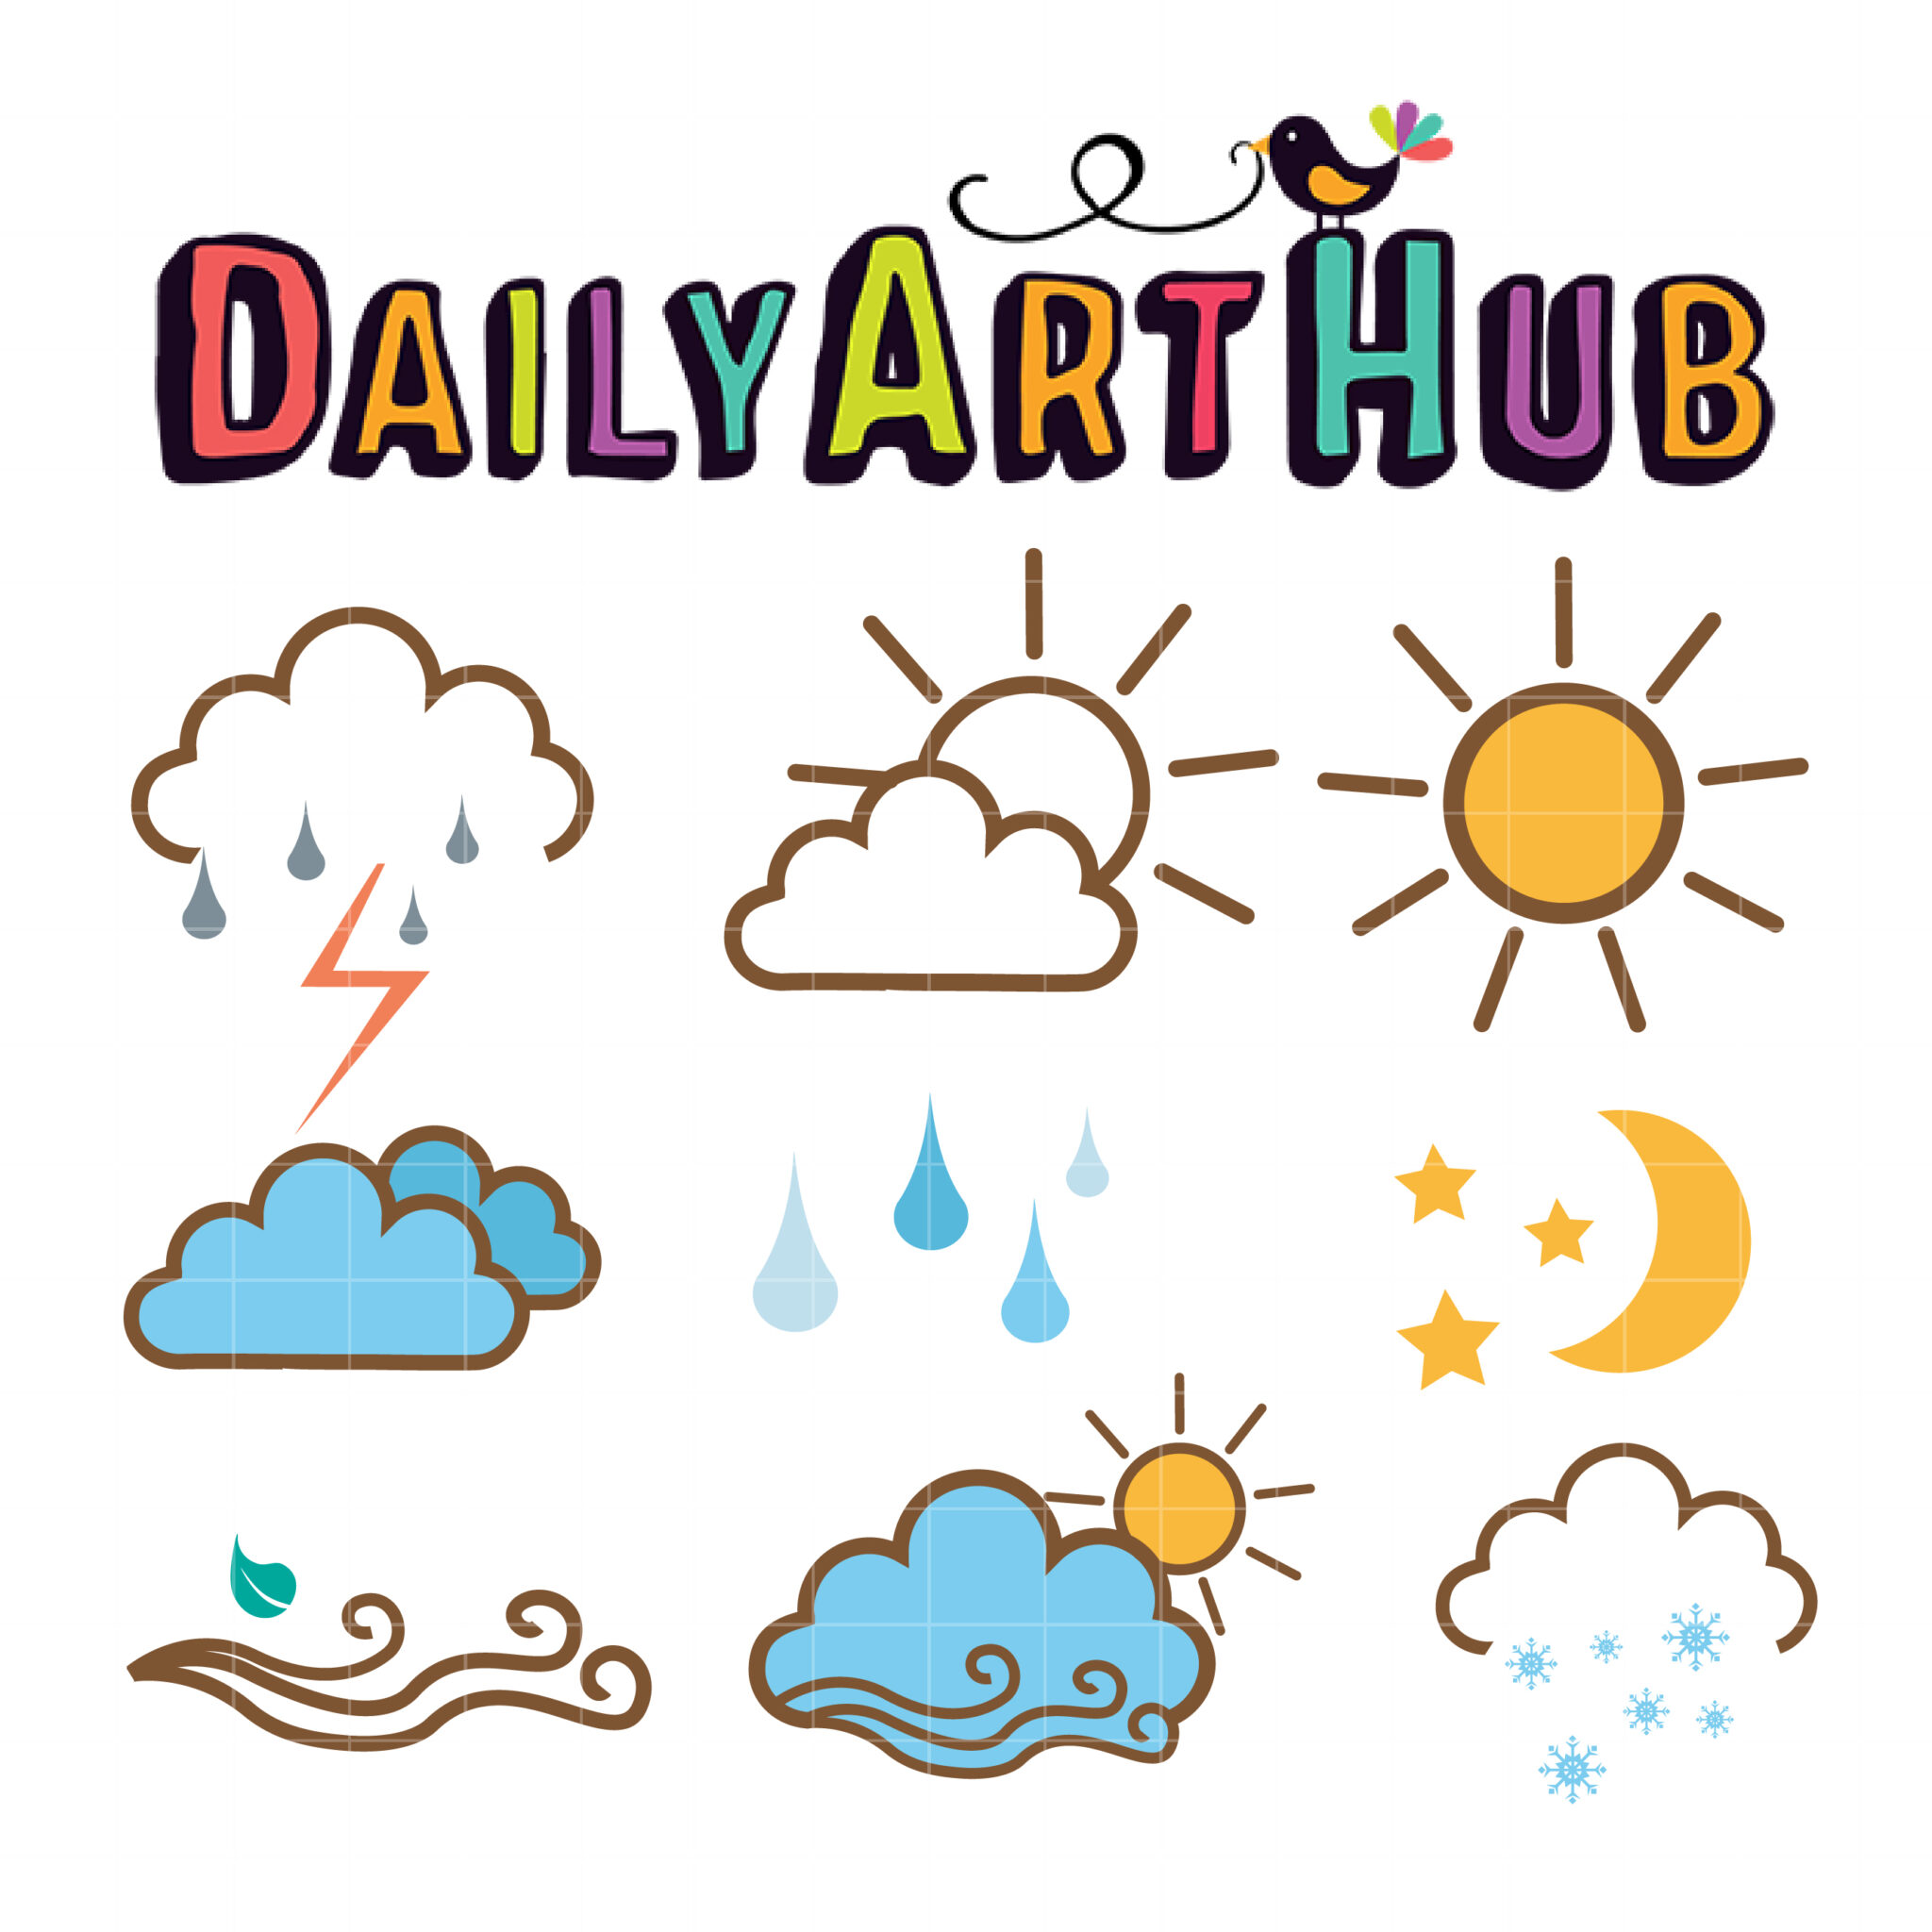 https://www.dailyarthub.com/wp-content/uploads/2020/05/Cute-Weather-Planner-scaled.jpg